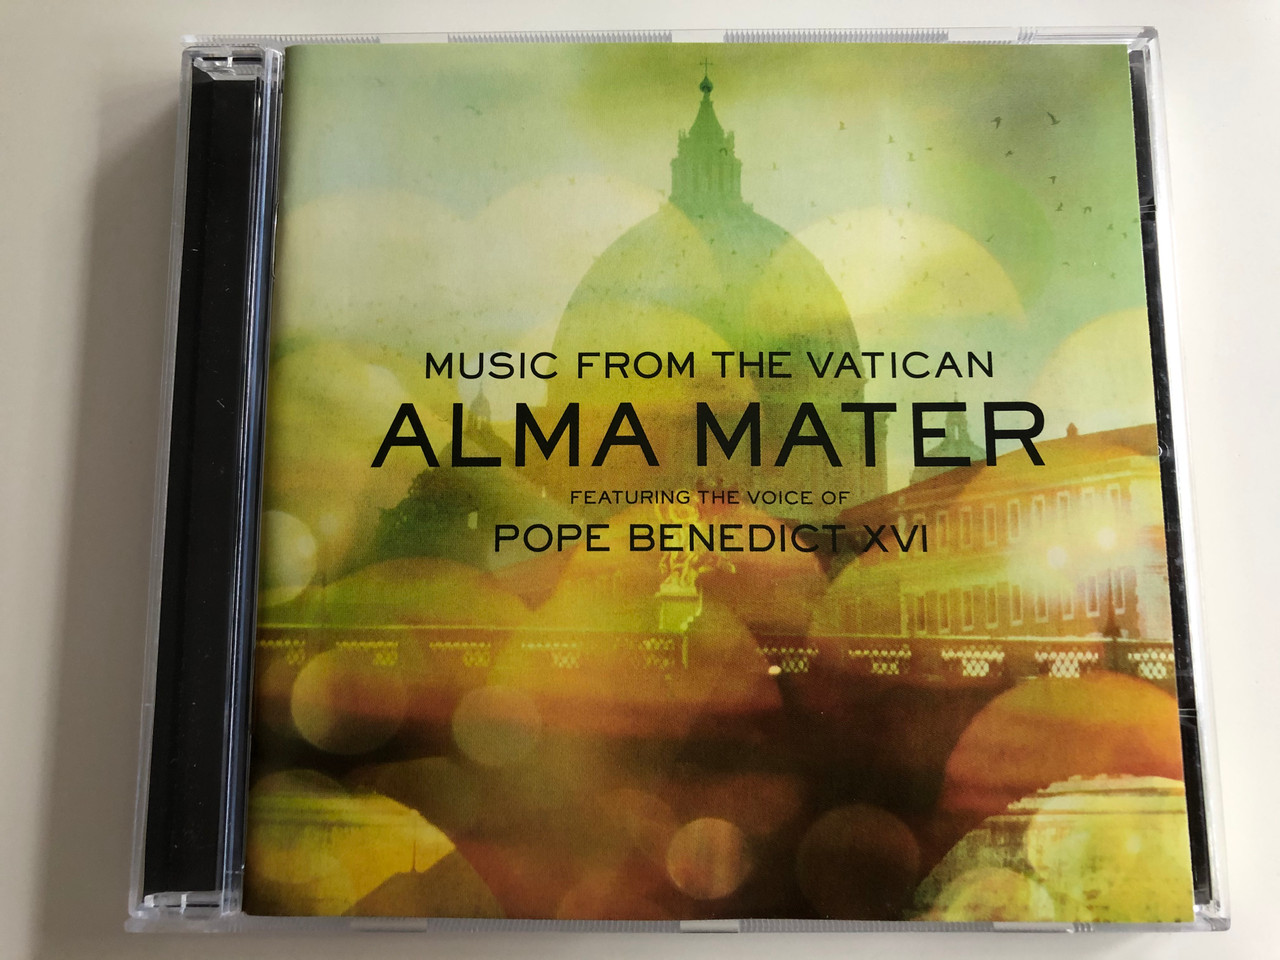 Music From The Vatican – Alma Mater / Featuring The Voice Of Benedict XVI Paolo CD 2009 / 2719619 - bibleinmylanguage